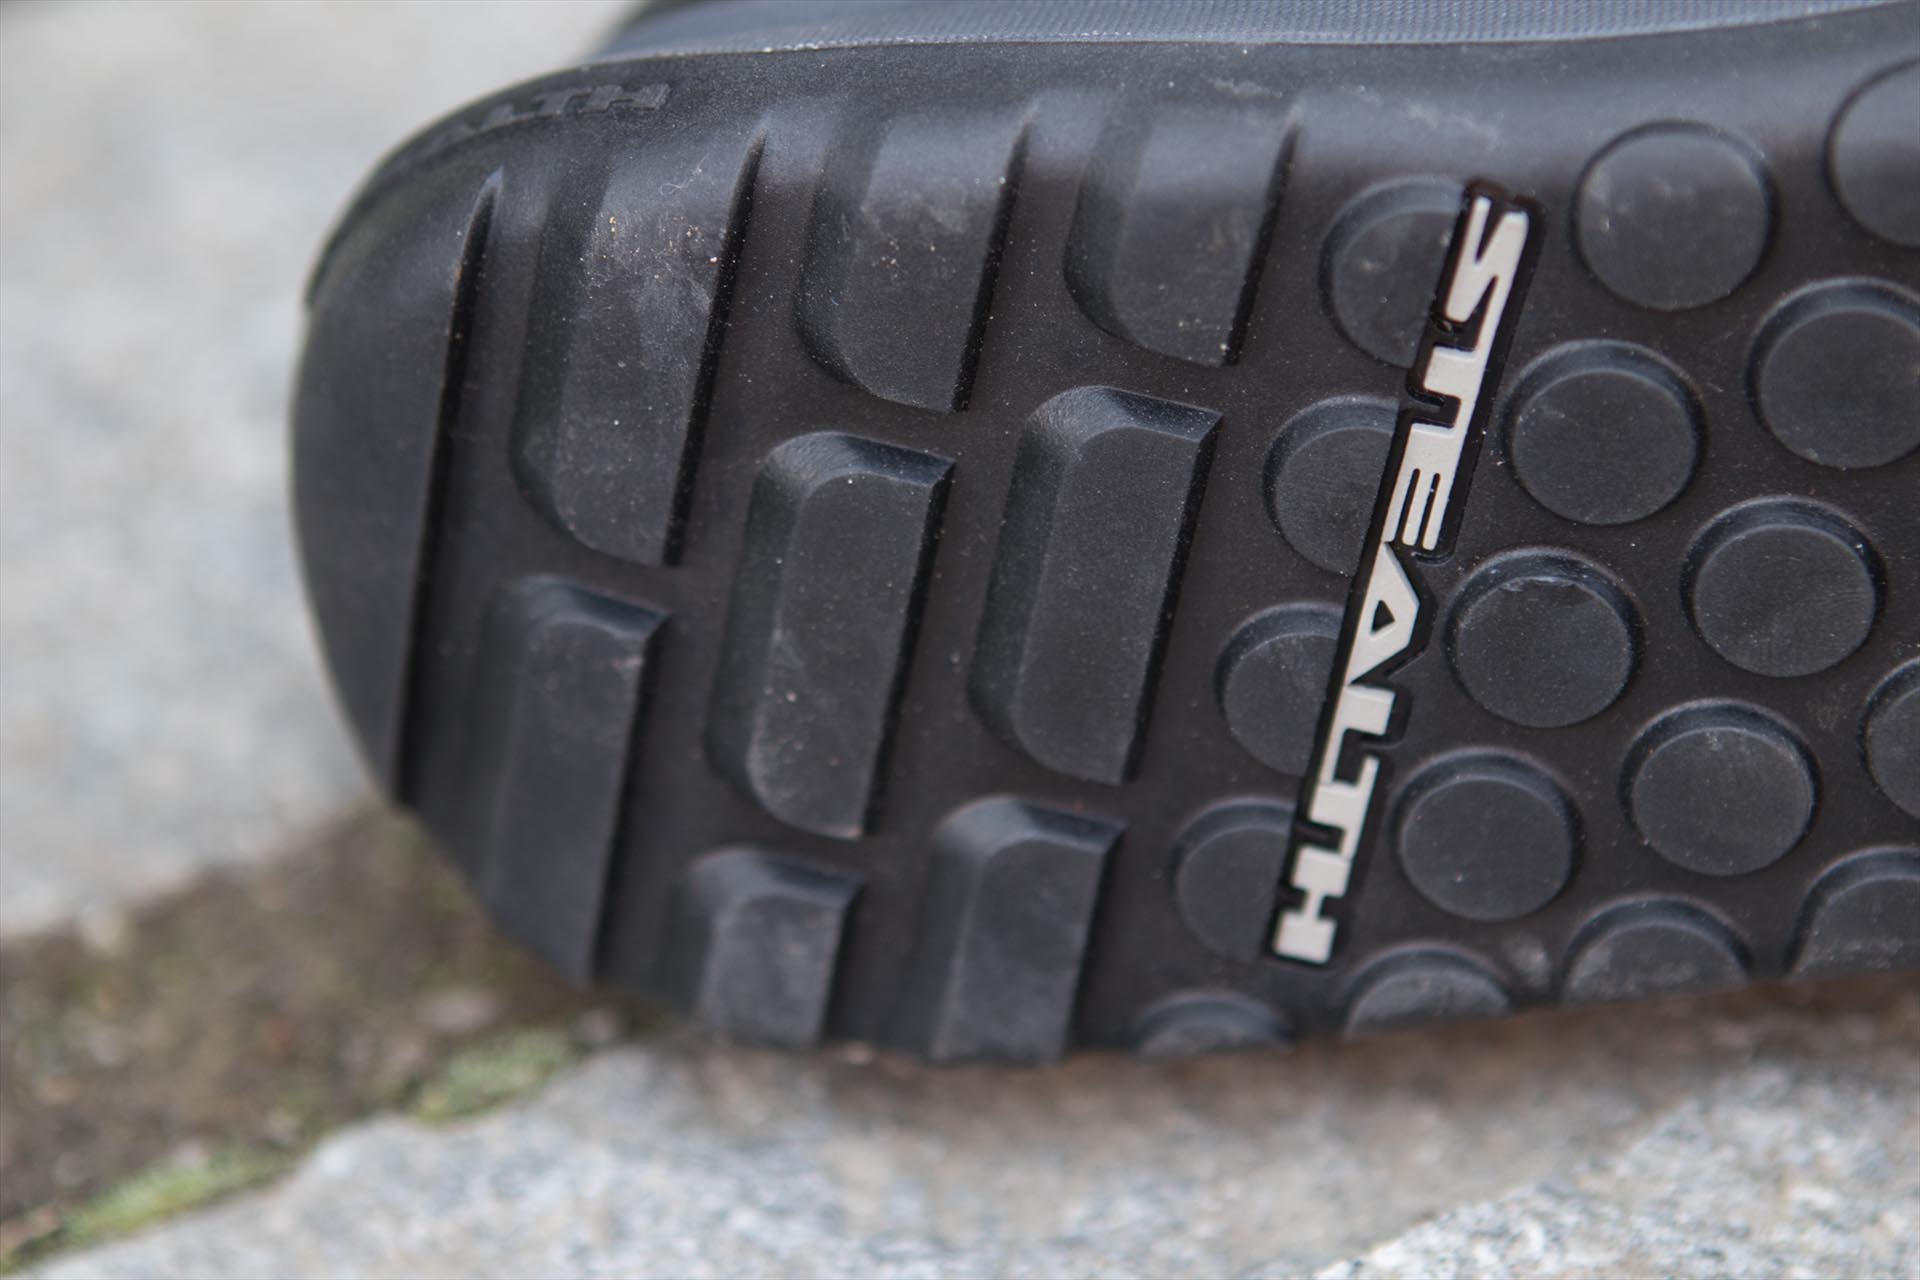 Fiveten and Adidas Reinvent the Flat Pedal Shoe - The Trailcross